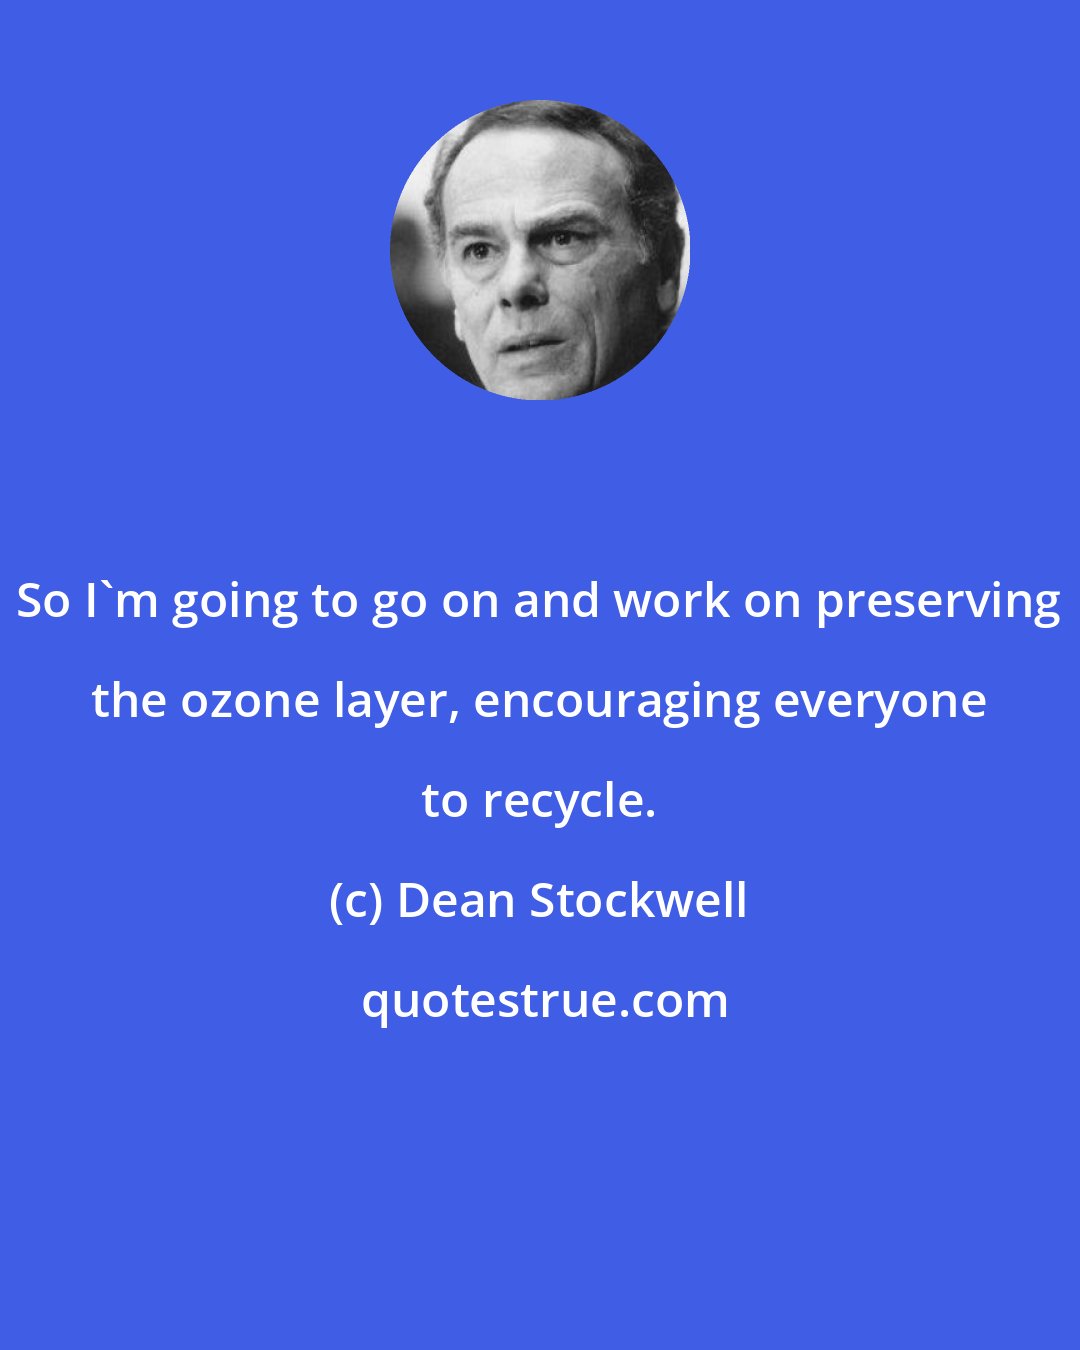 Dean Stockwell: So I'm going to go on and work on preserving the ozone layer, encouraging everyone to recycle.